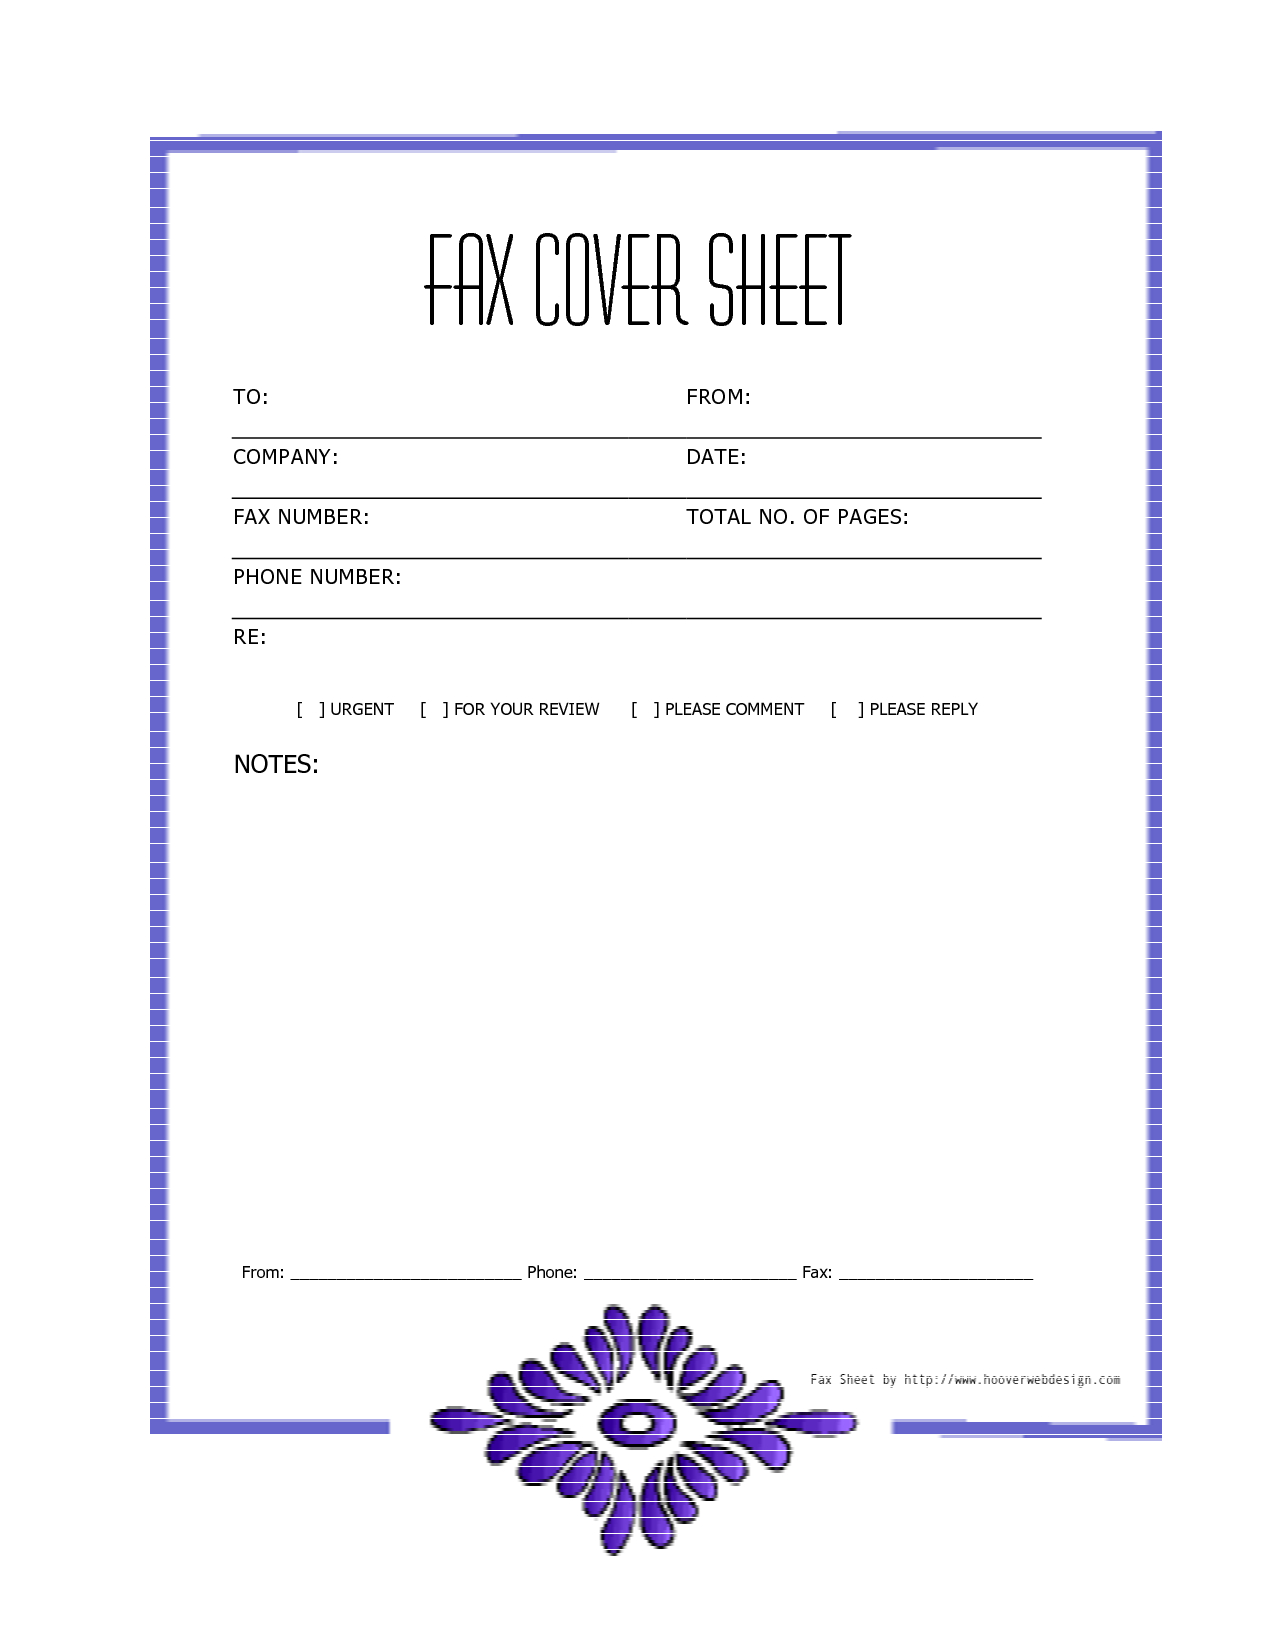 Microsoft Word Fax Cover Letter Template - Free Downloads Fax Covers Sheets